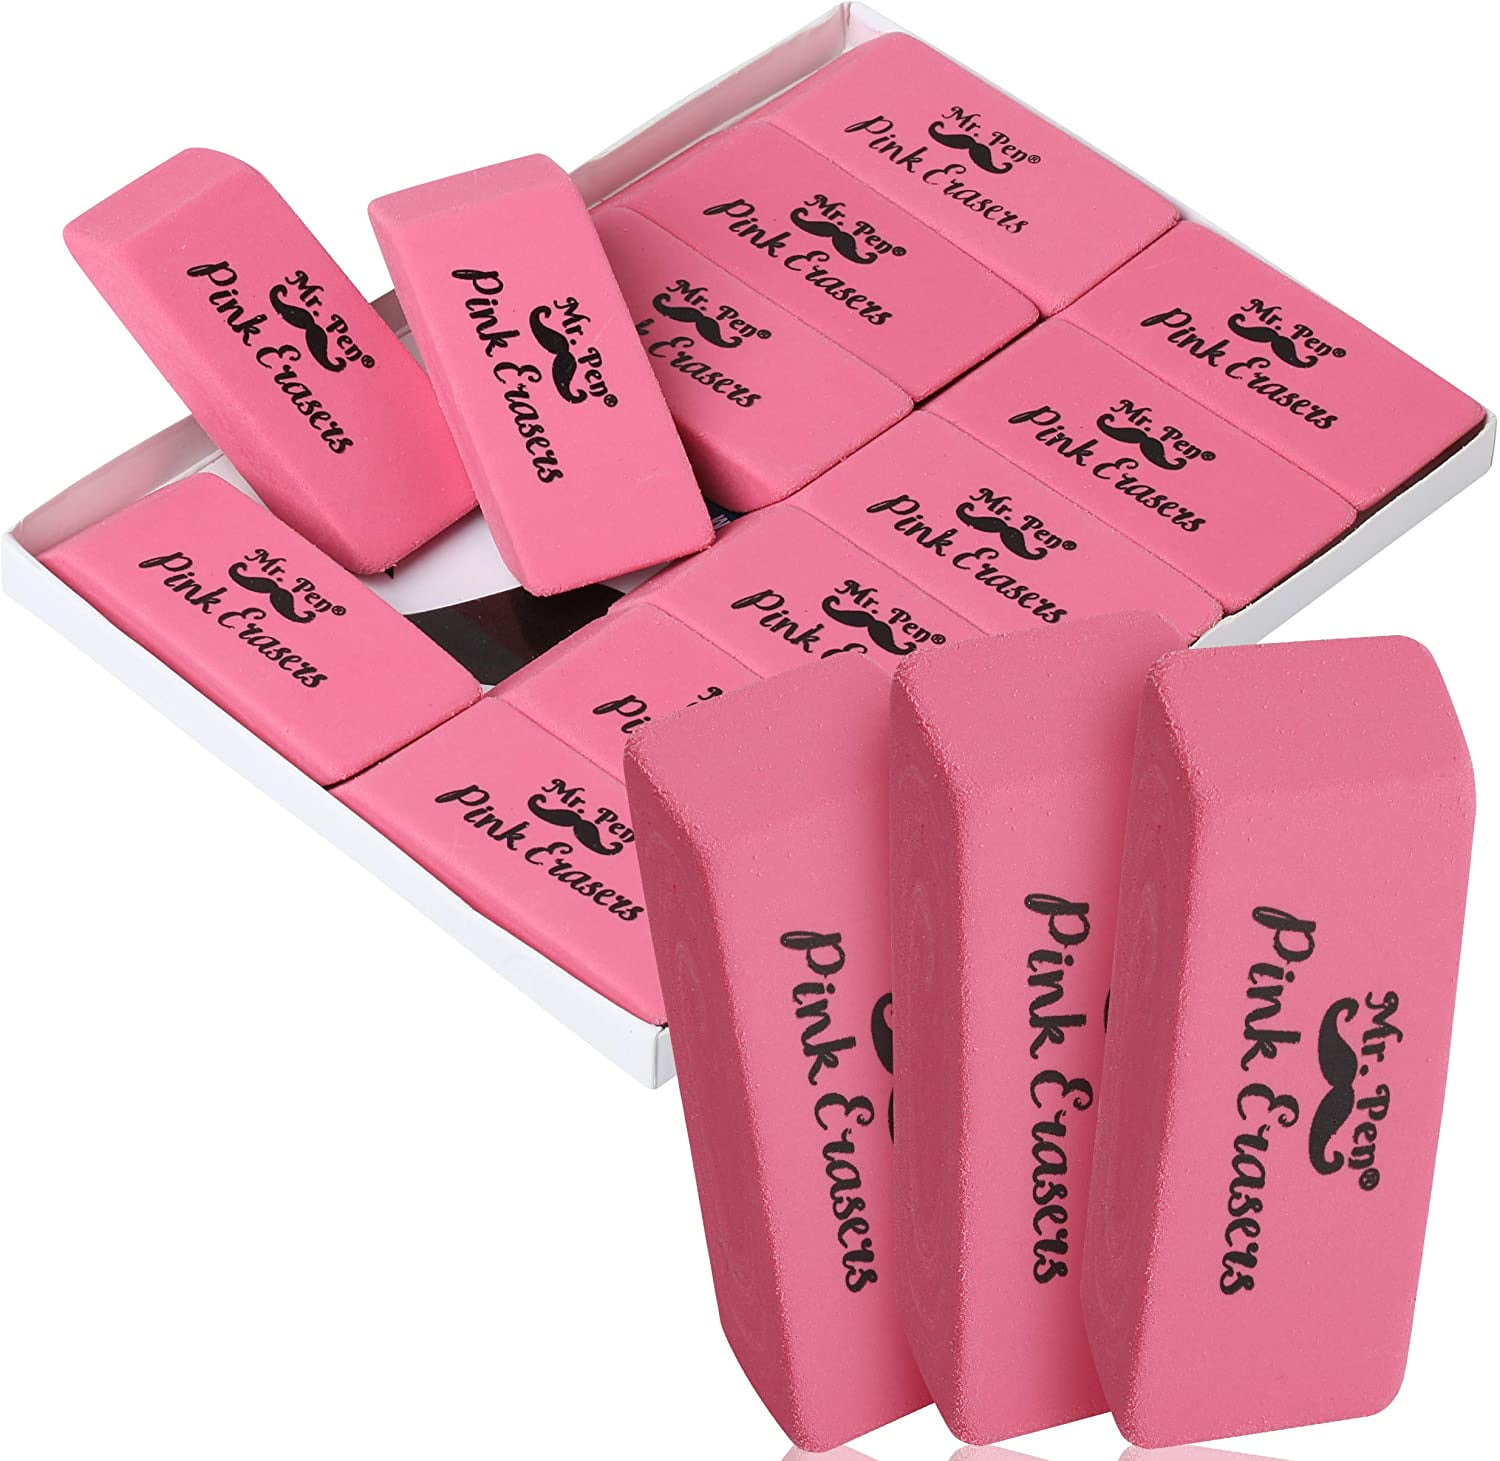 12pc HB Eraser Tipped Pencil Rubber Writing Drawing Office School Student Supply 